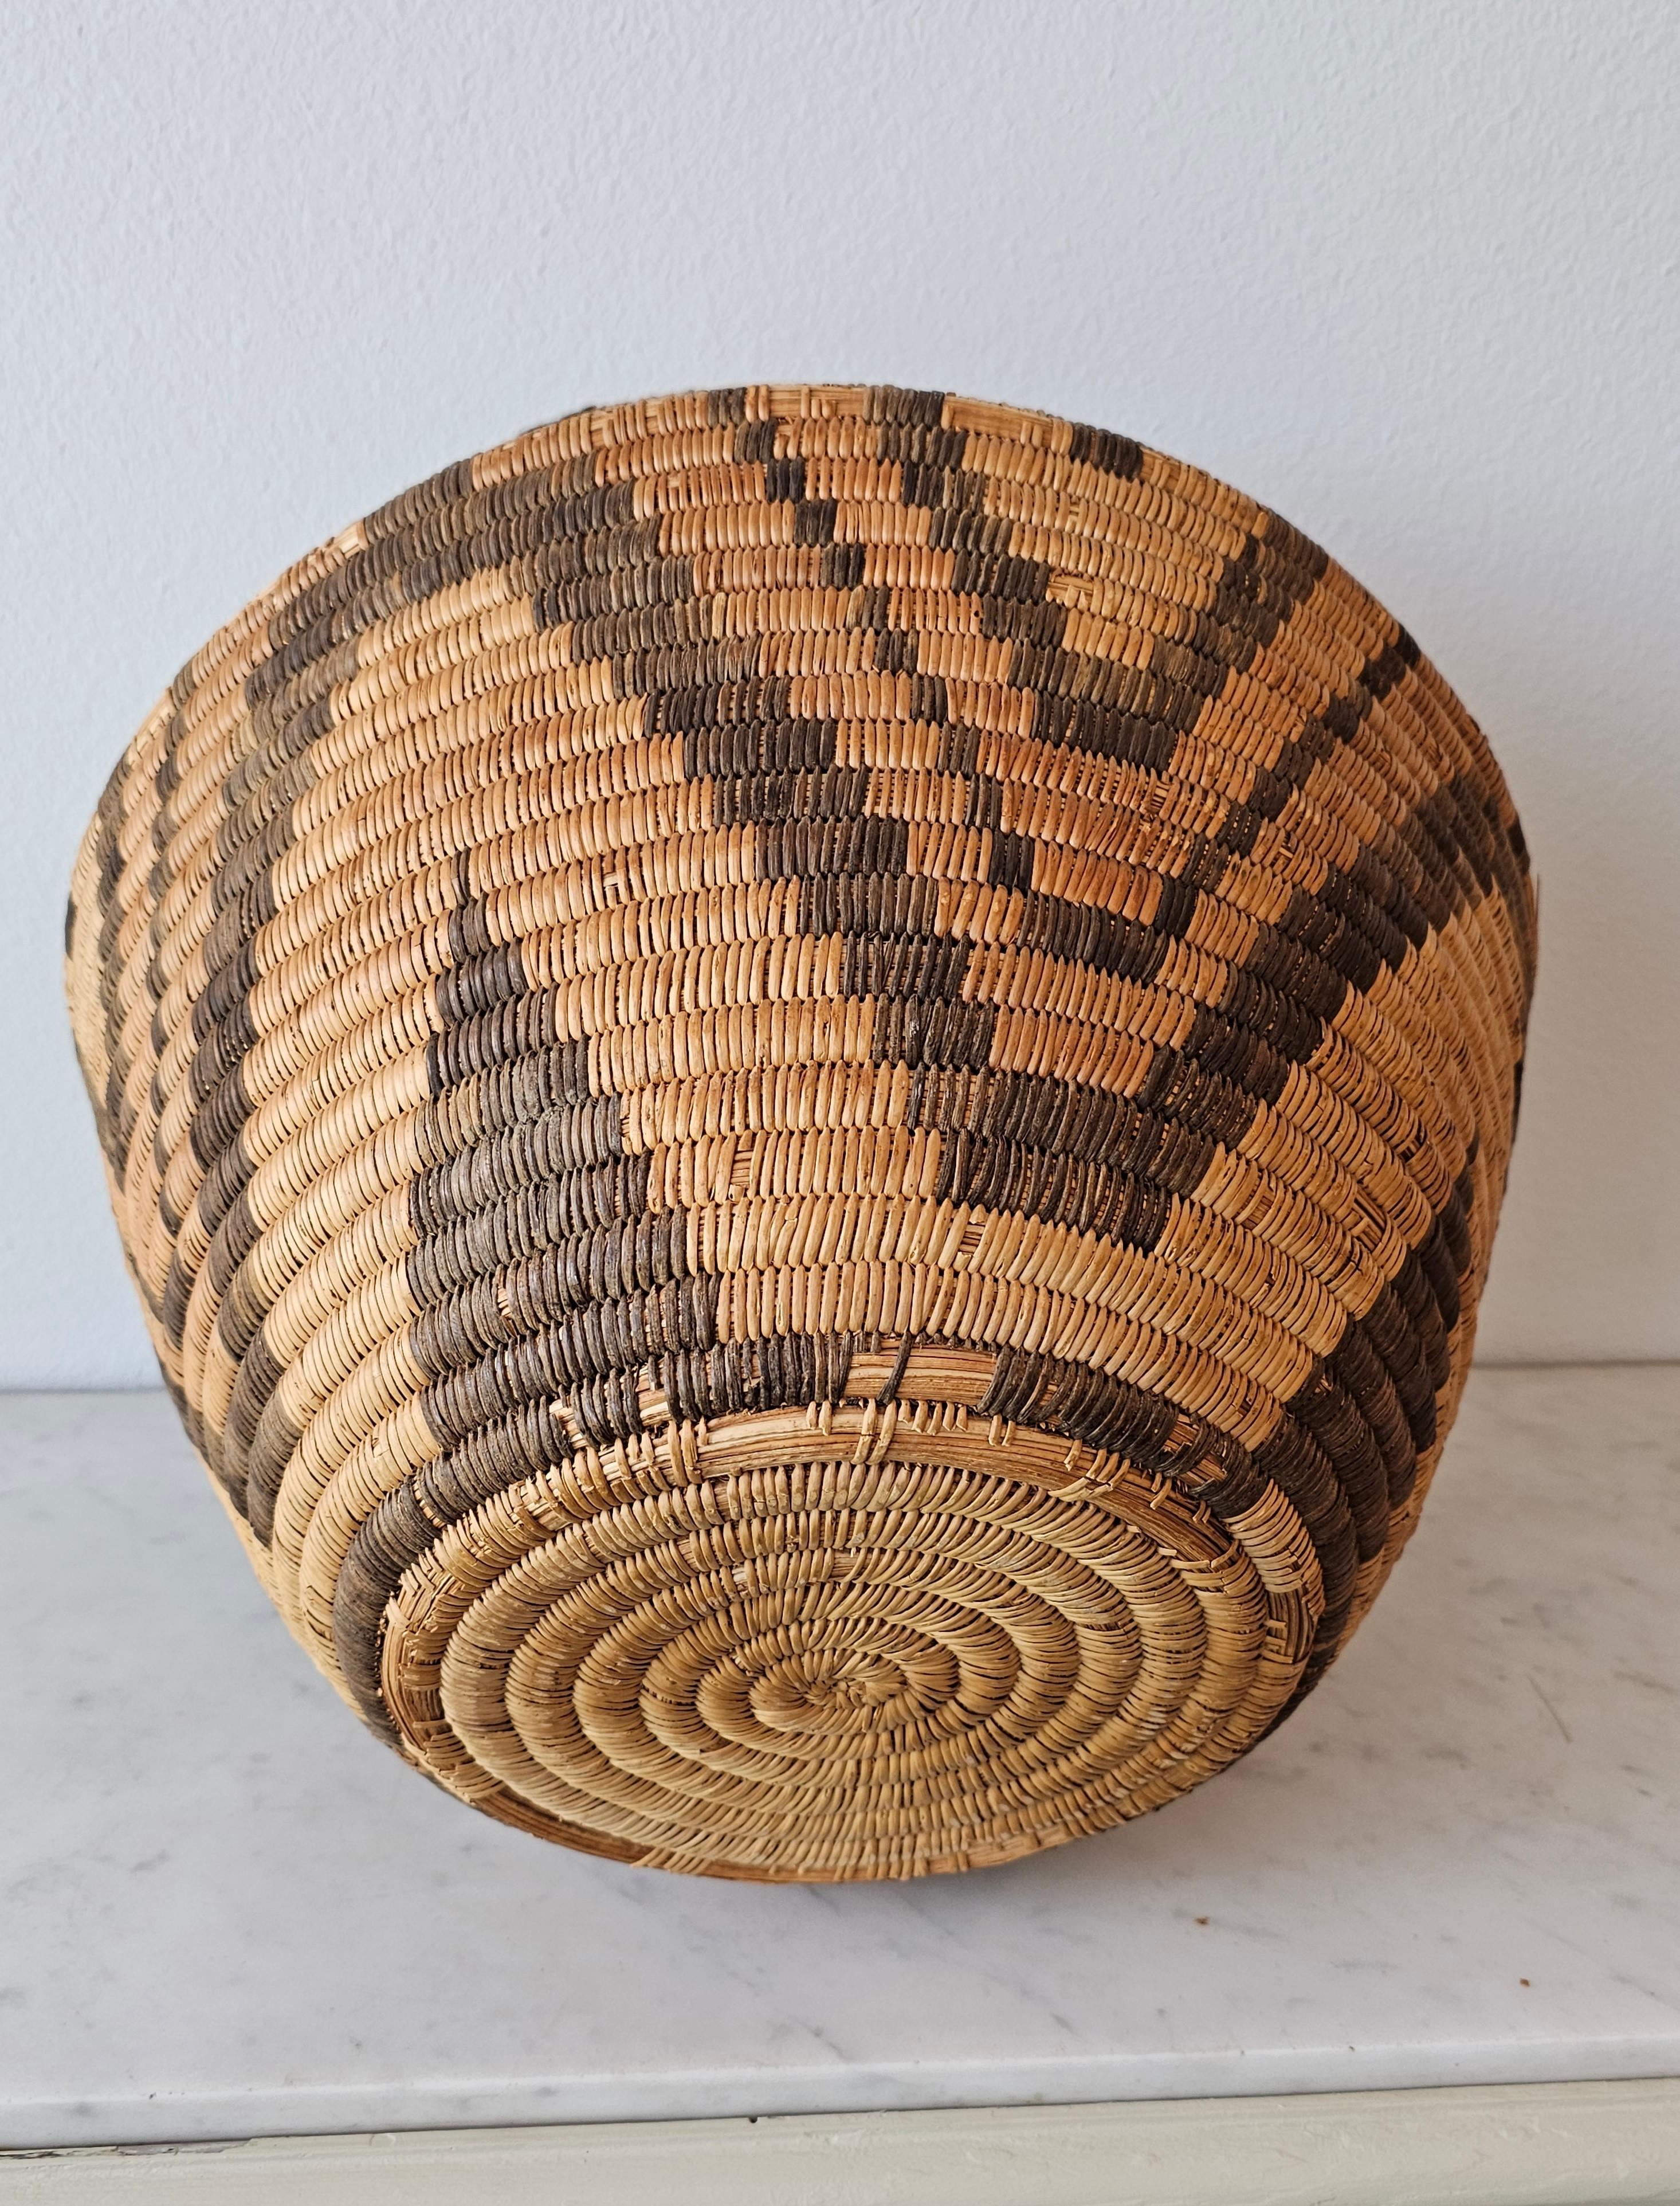 American Antique Apache Olla Jar Coiled Willow Wicker Devil's Claw Basket  For Sale